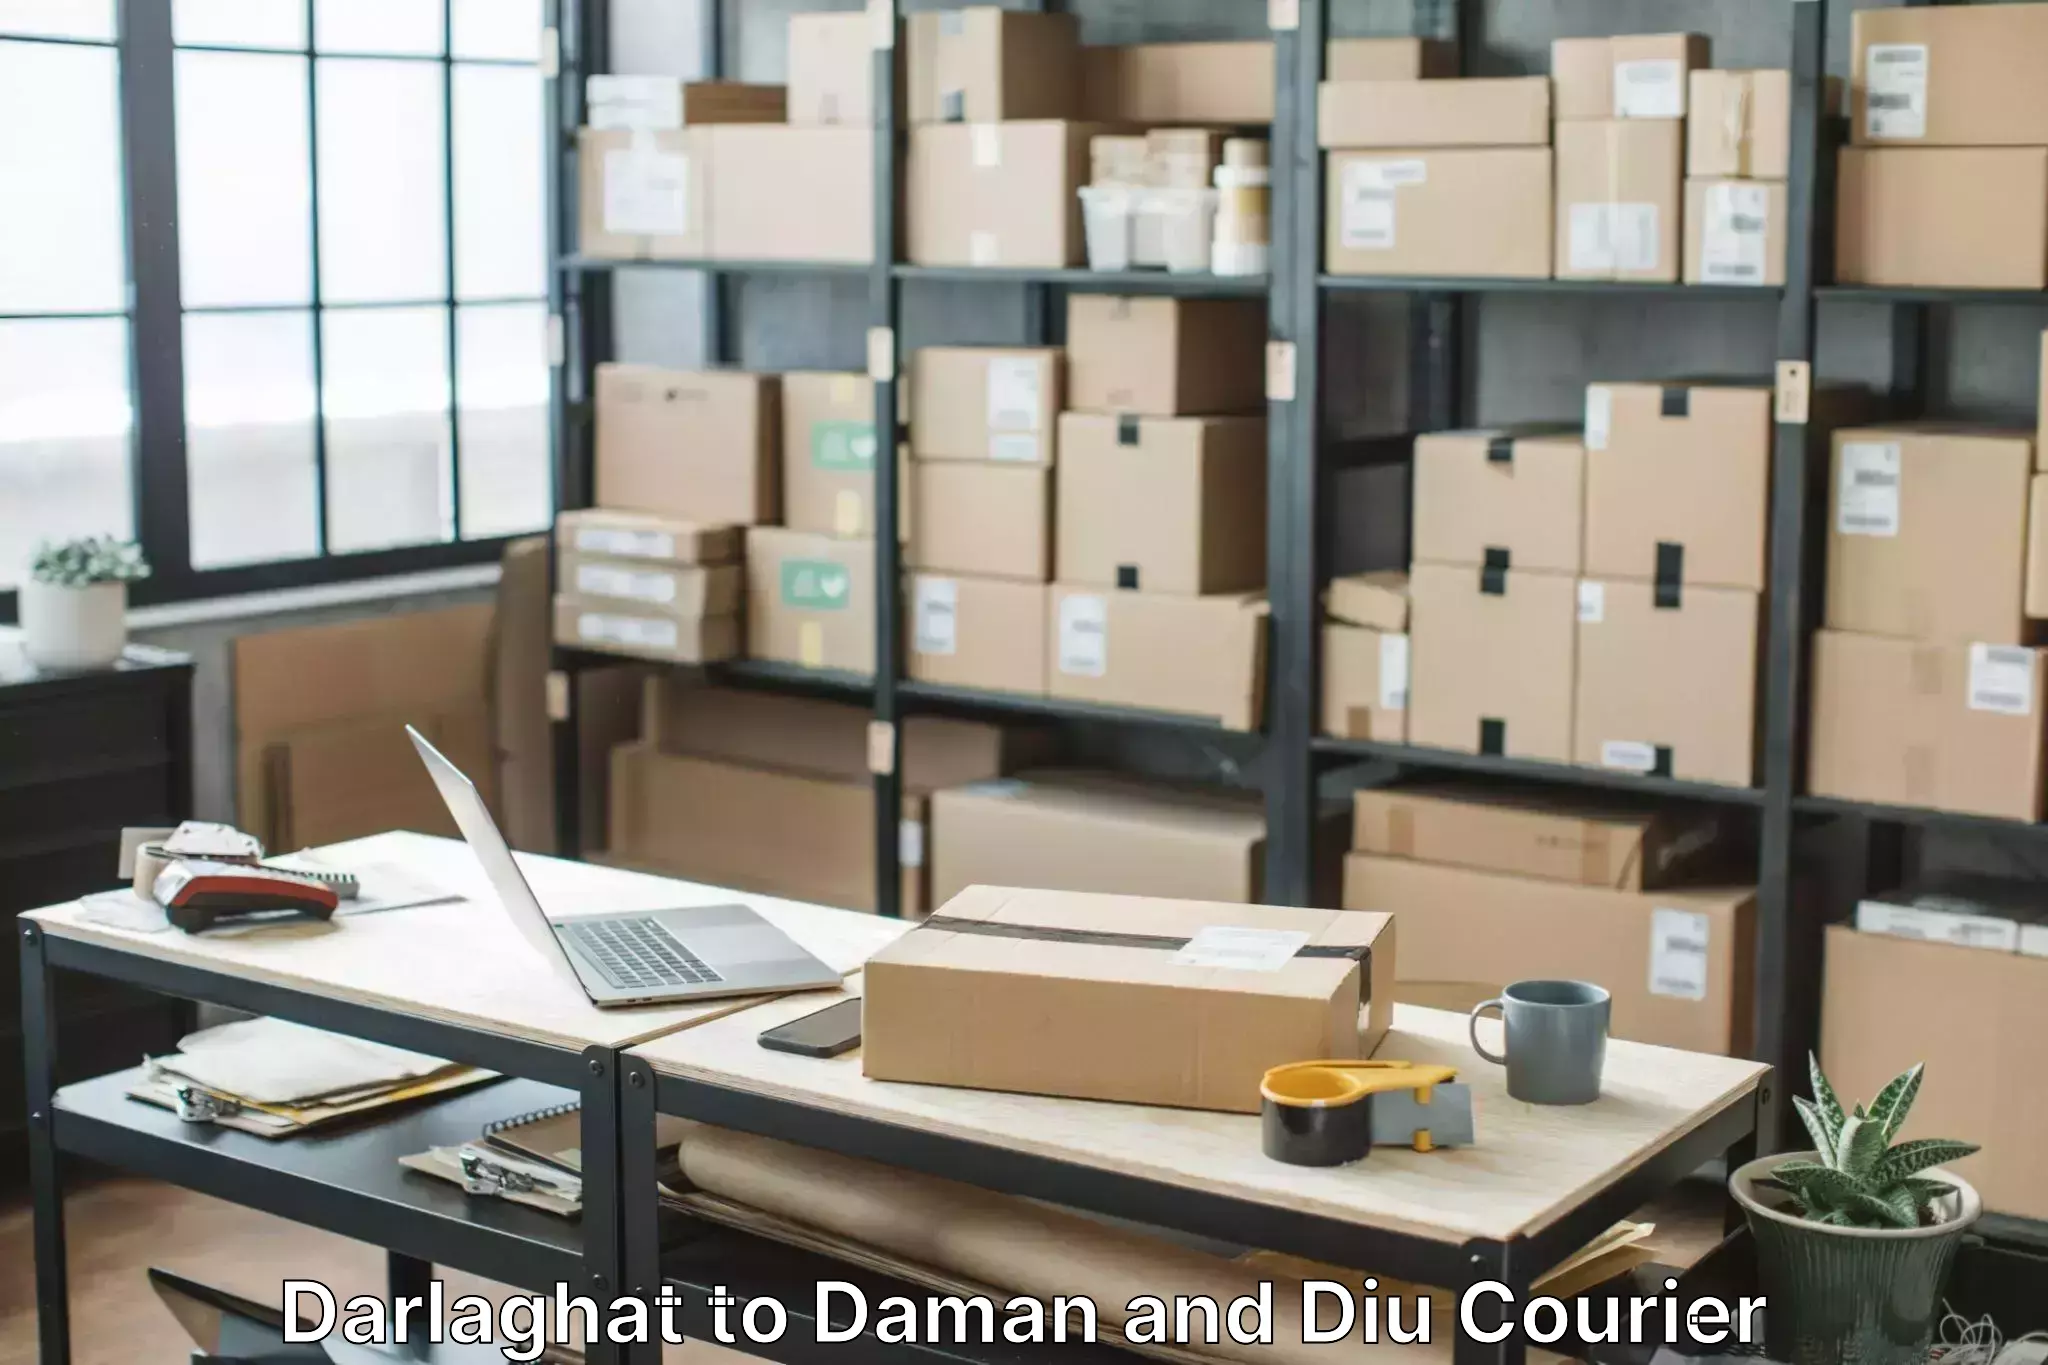 Trusted relocation experts Darlaghat to Daman and Diu